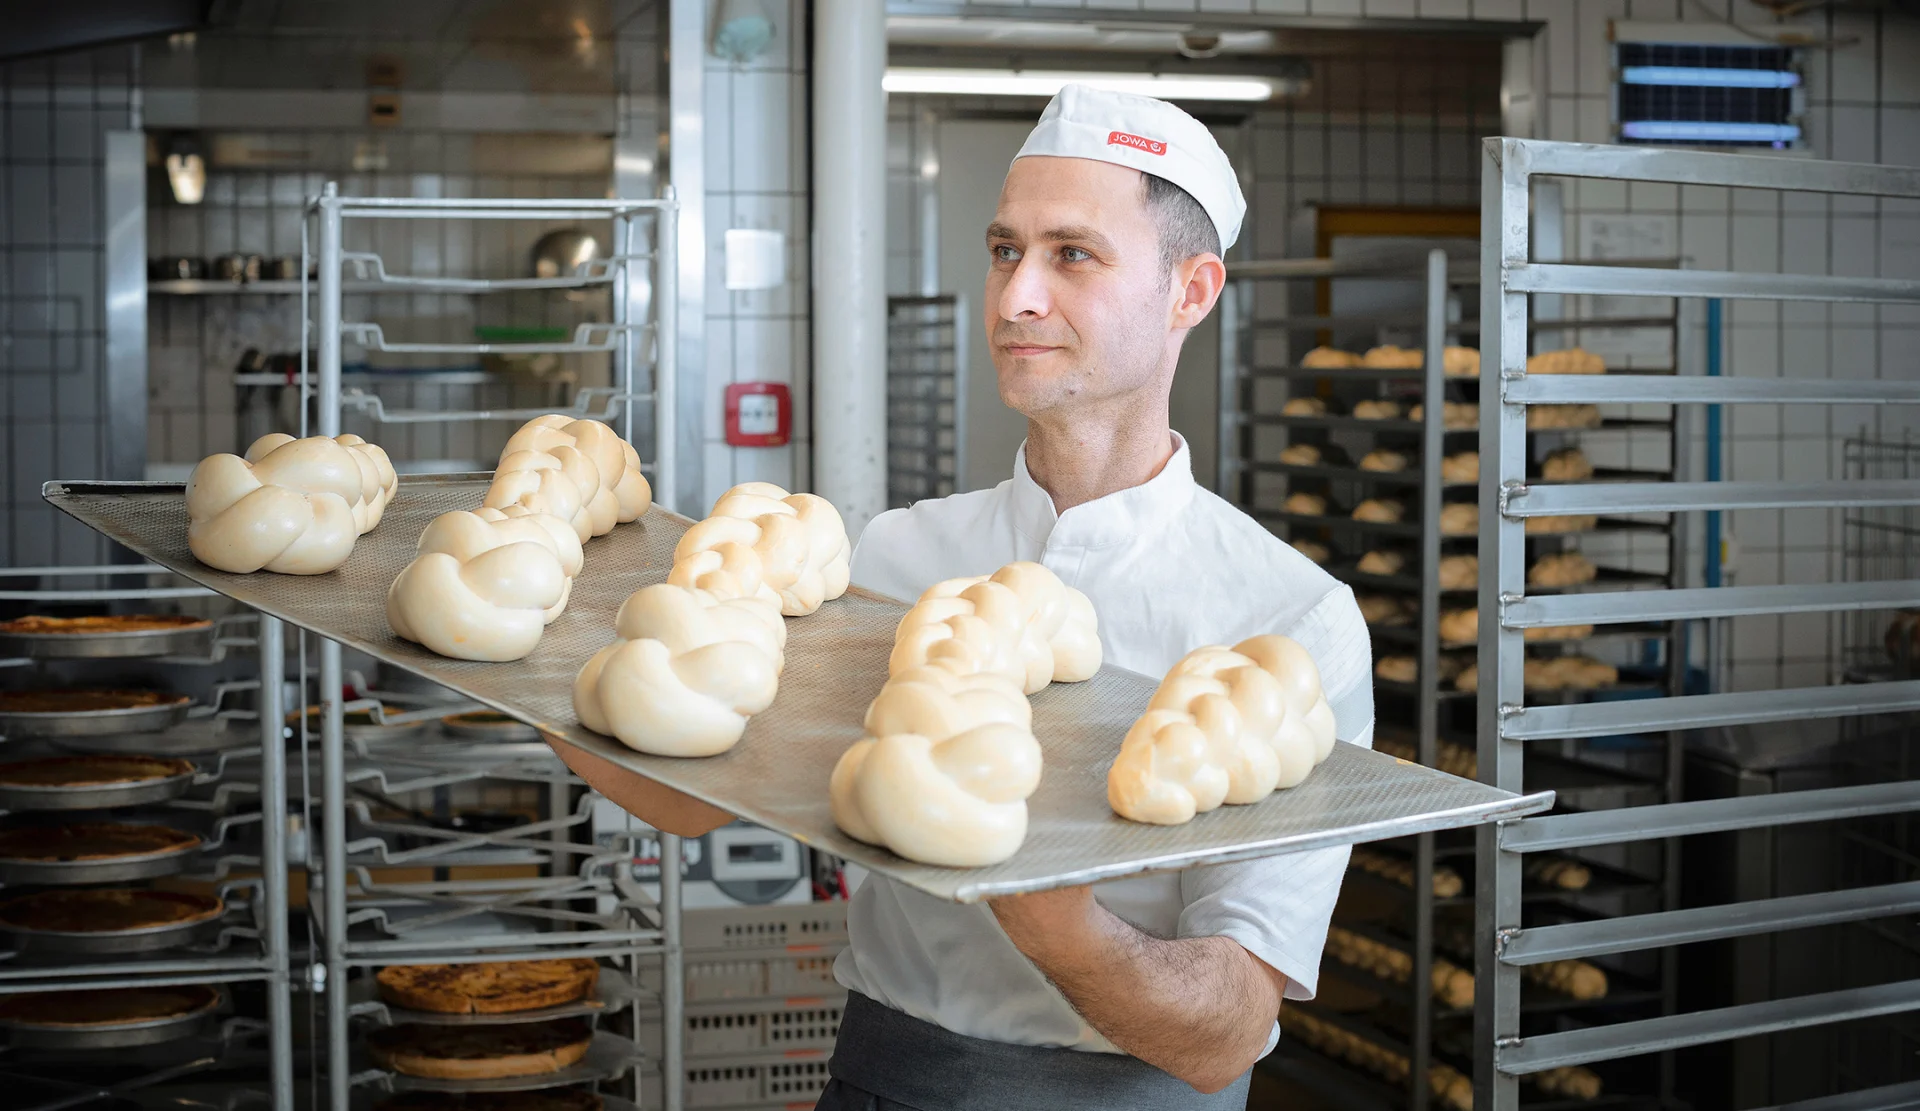 Fuad holds a tray of braided bread dough